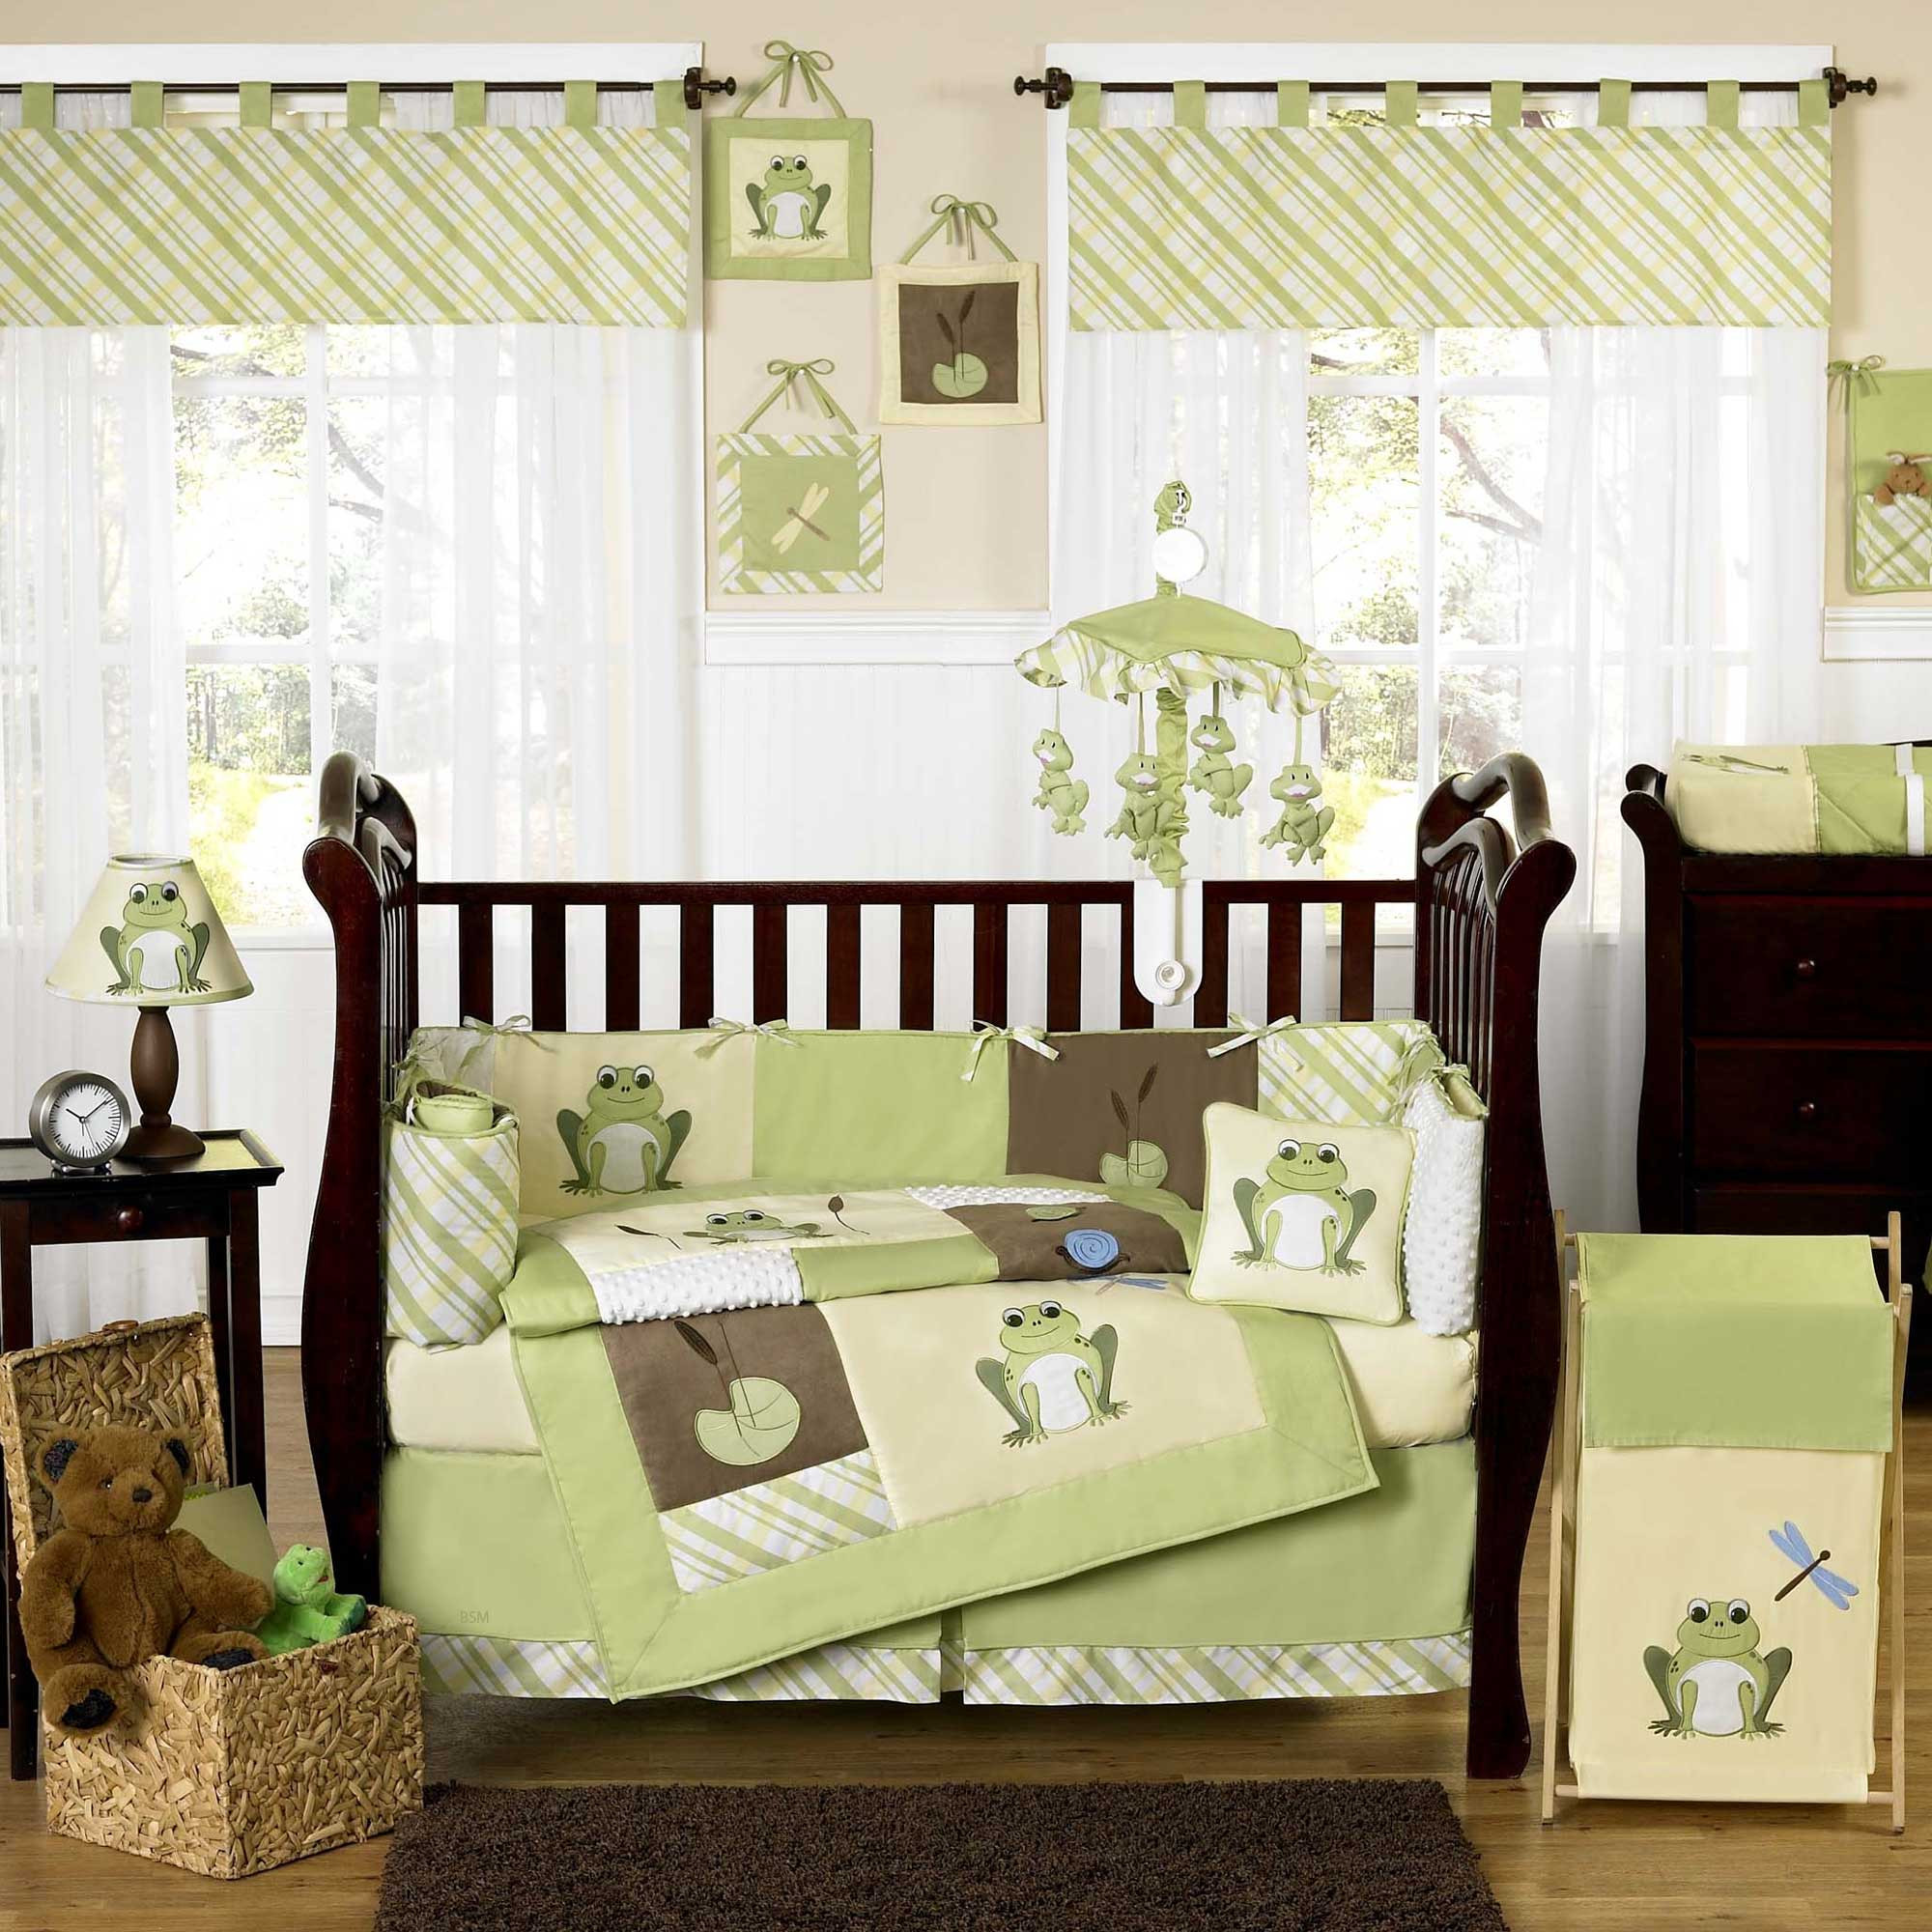 Room Decoration For Baby
 Themes For Baby Rooms Ideas – HomesFeed